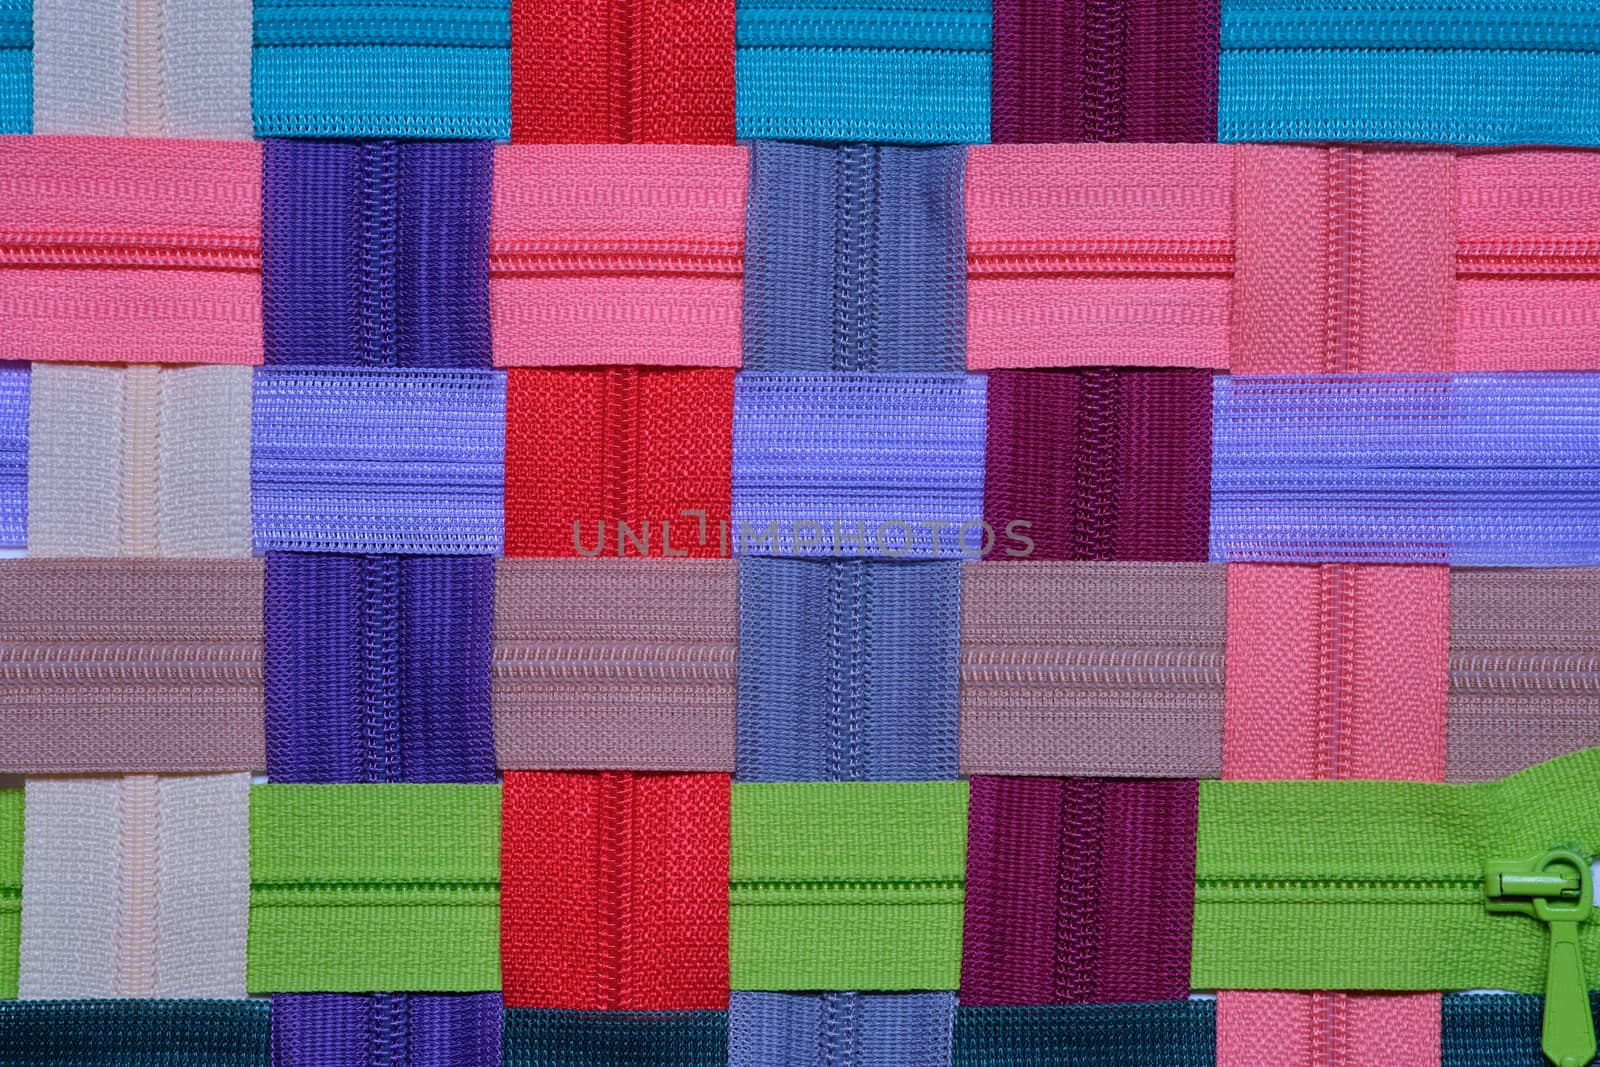 Colorful zipper for sewing and arrange as a background by Fischeron